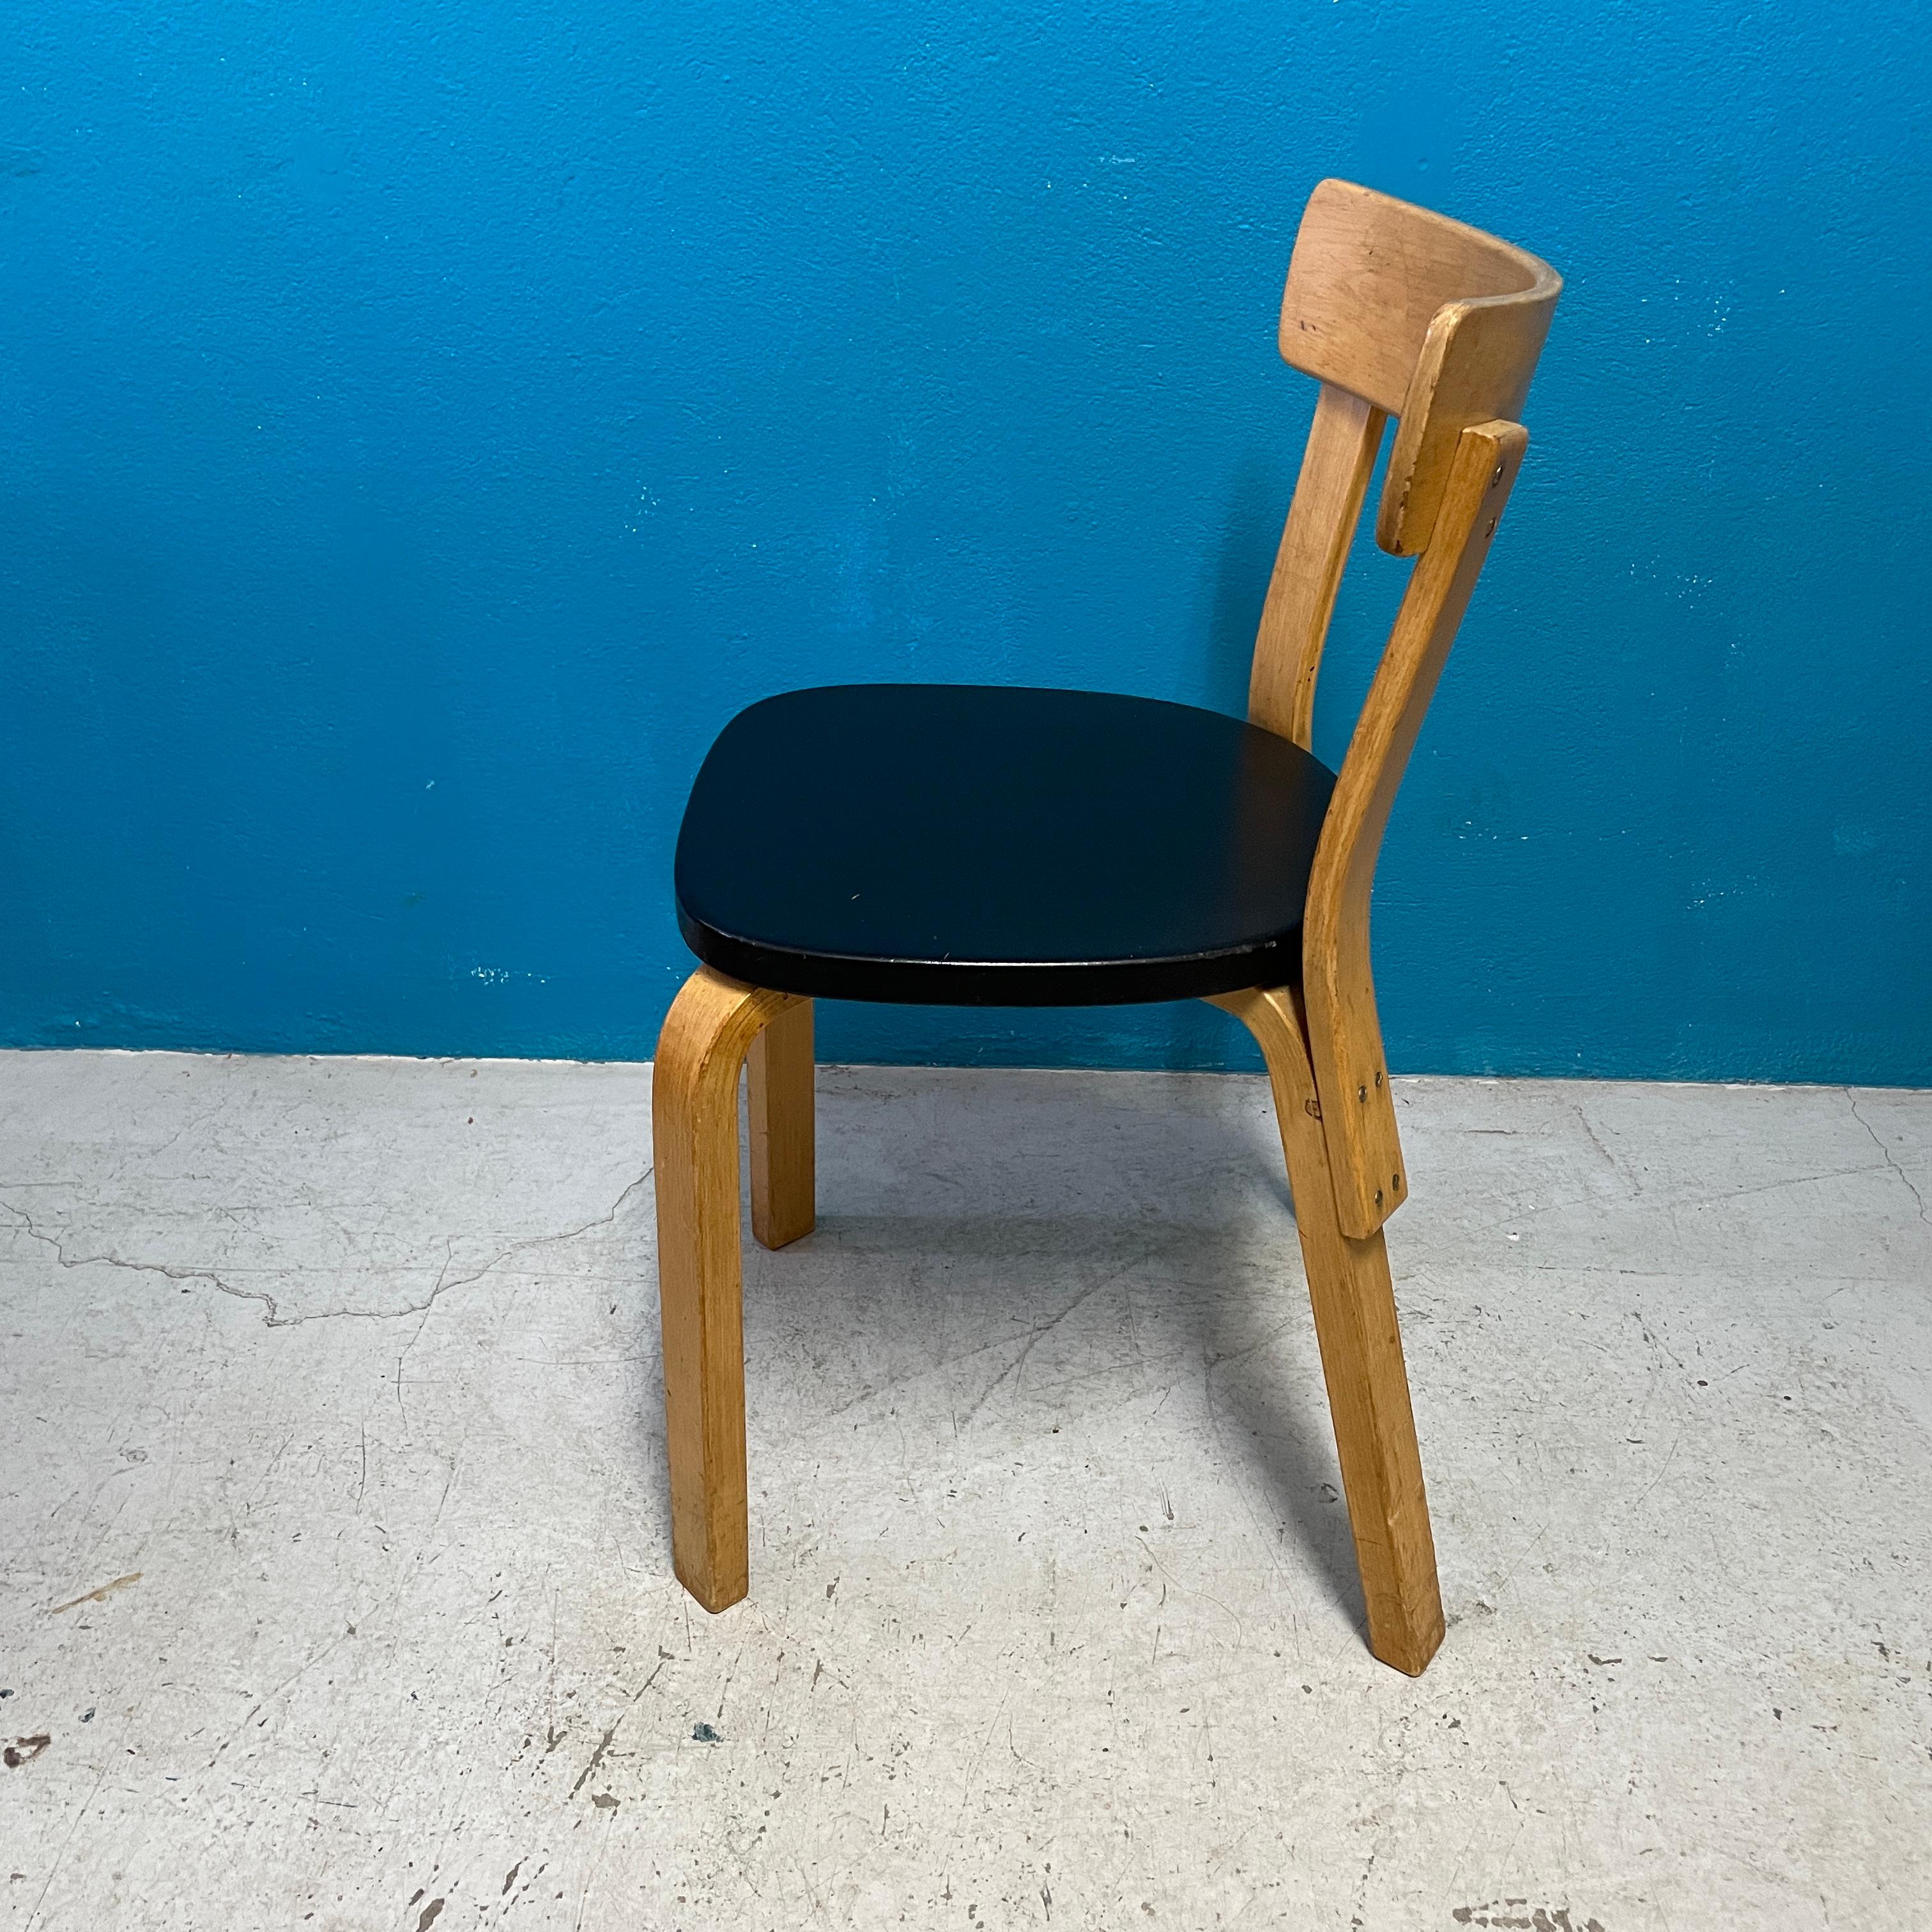 Artek's chair 69 was designed by Alvar Aalto in 1935. he chair uses Aalto’s iconic L-leg structure, which allows the legs to be attached directly to the seat. As one of Aalto’s best-known dining chairs, Chair 69 easily suits any room of the